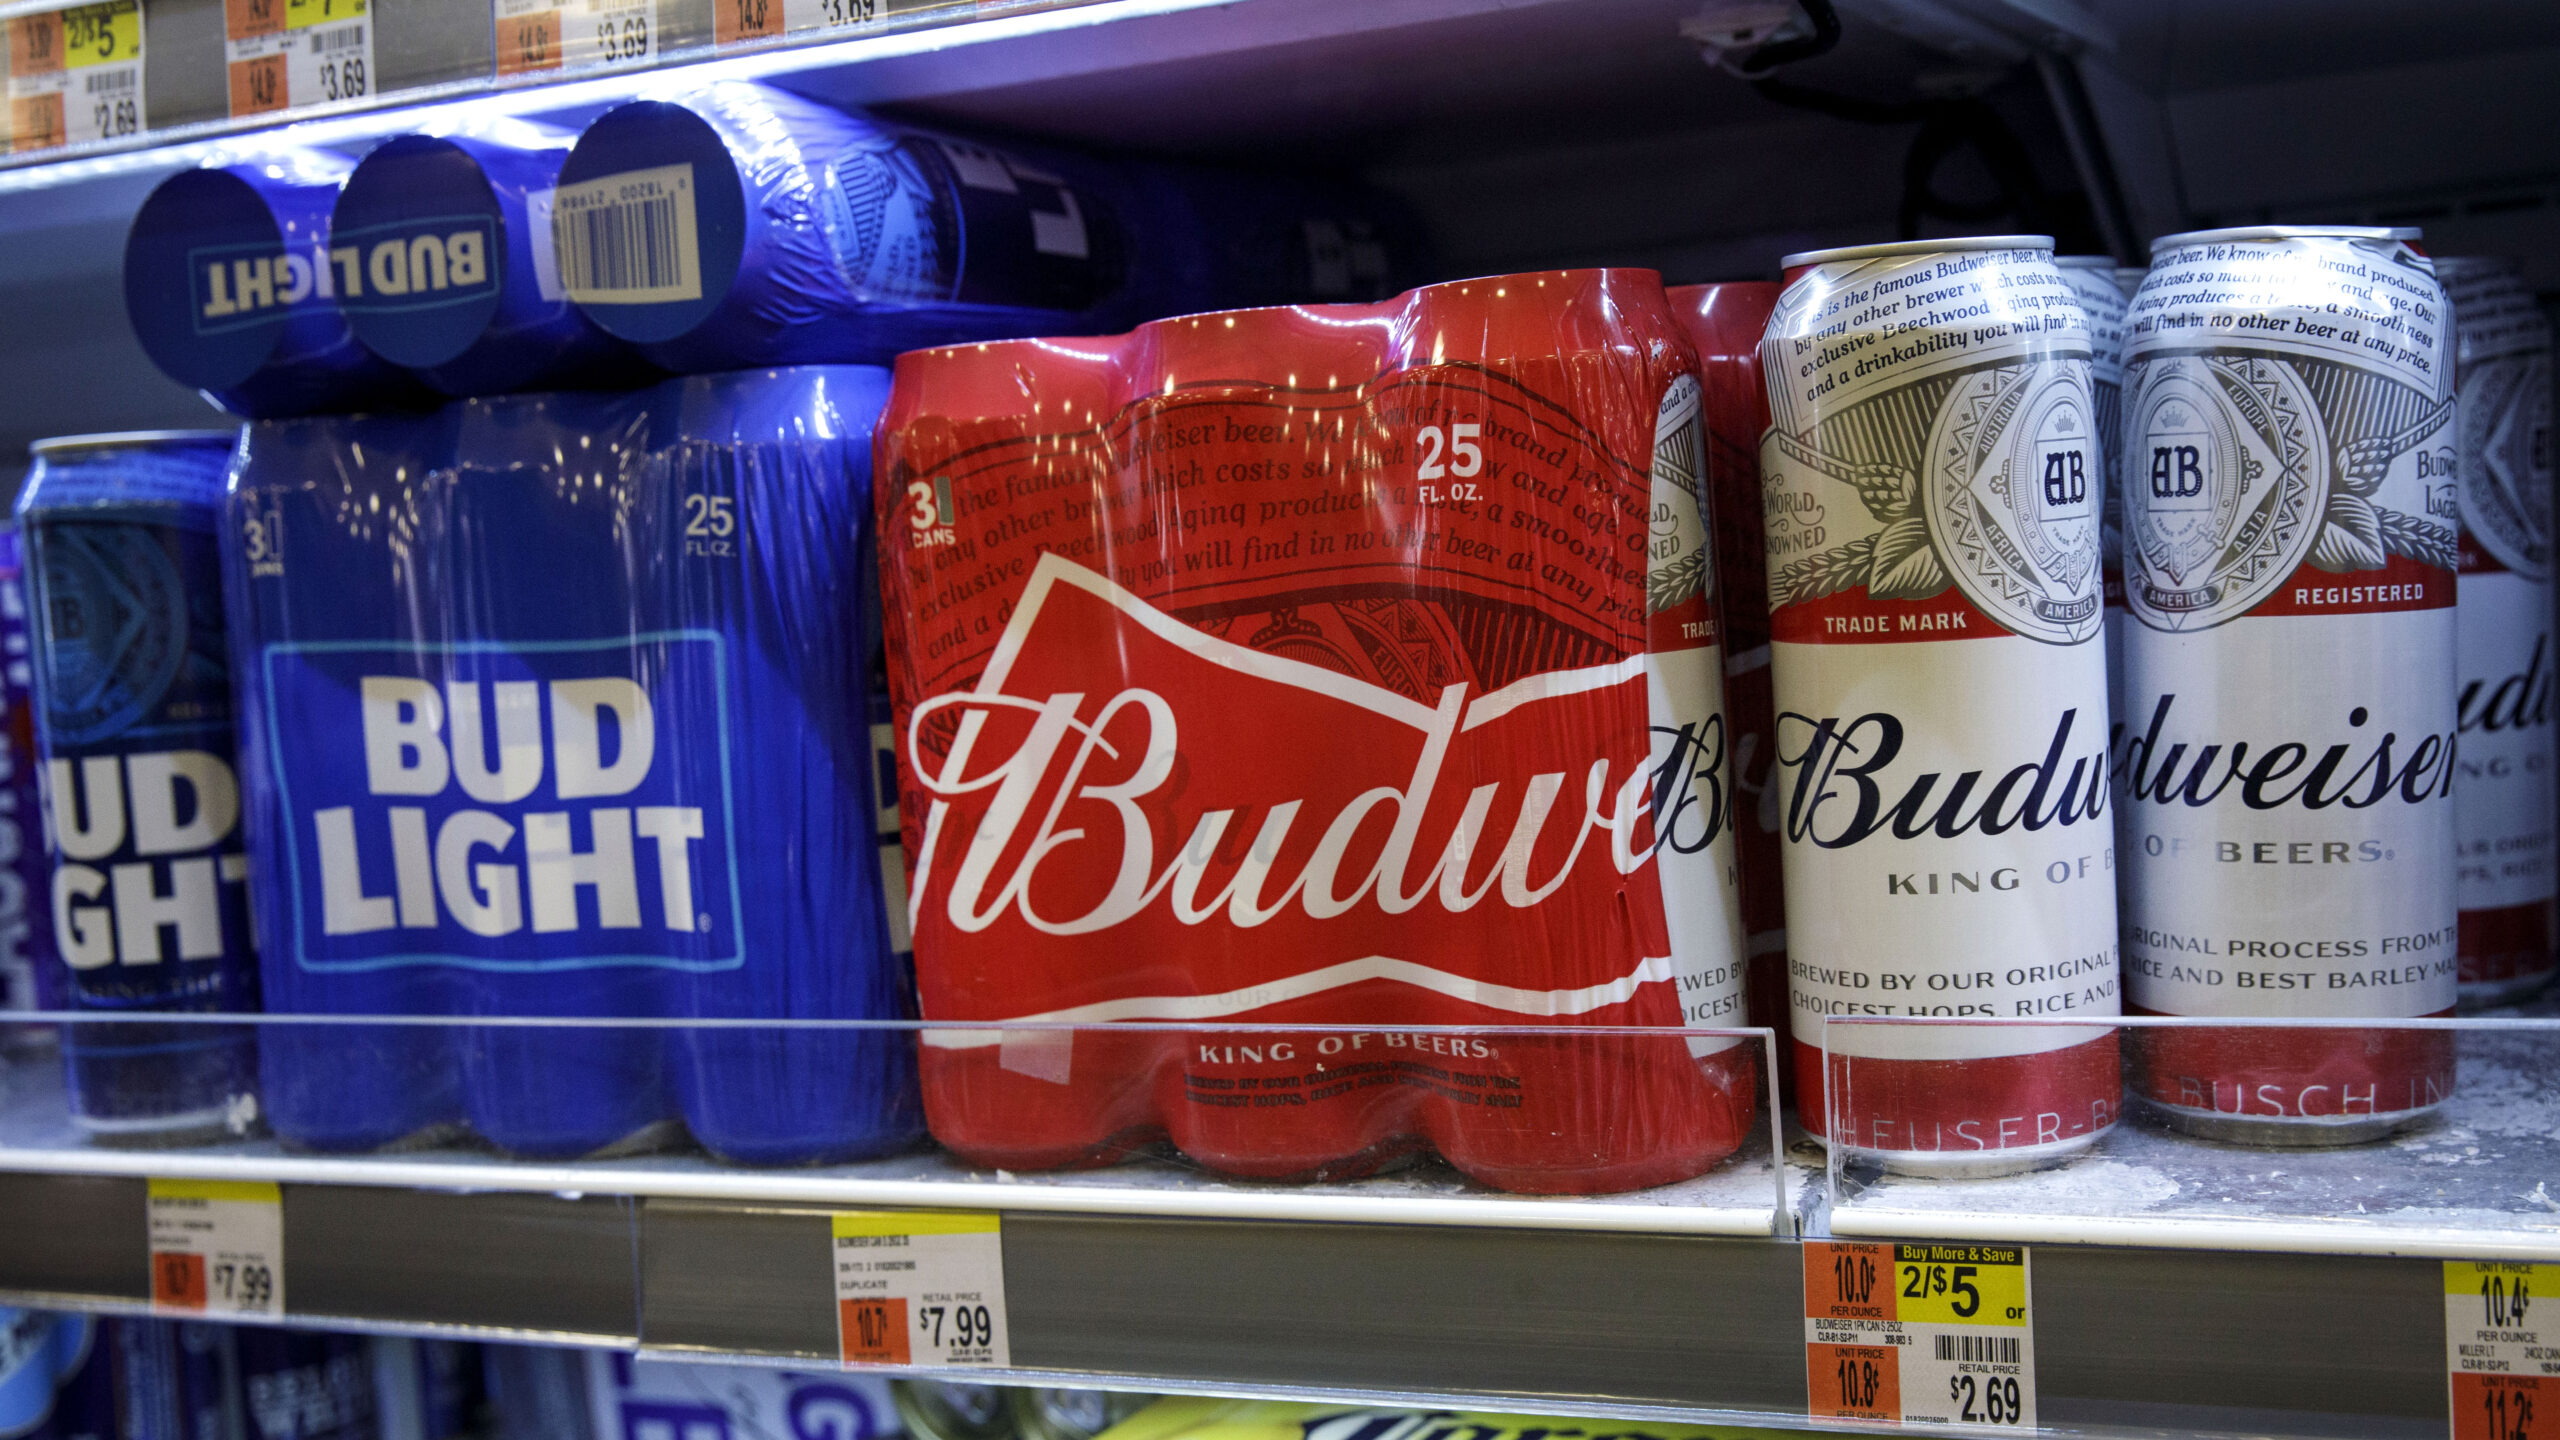 Anheuser-Busch’s worst backlash may be over, with some brands improving, according to a banker.